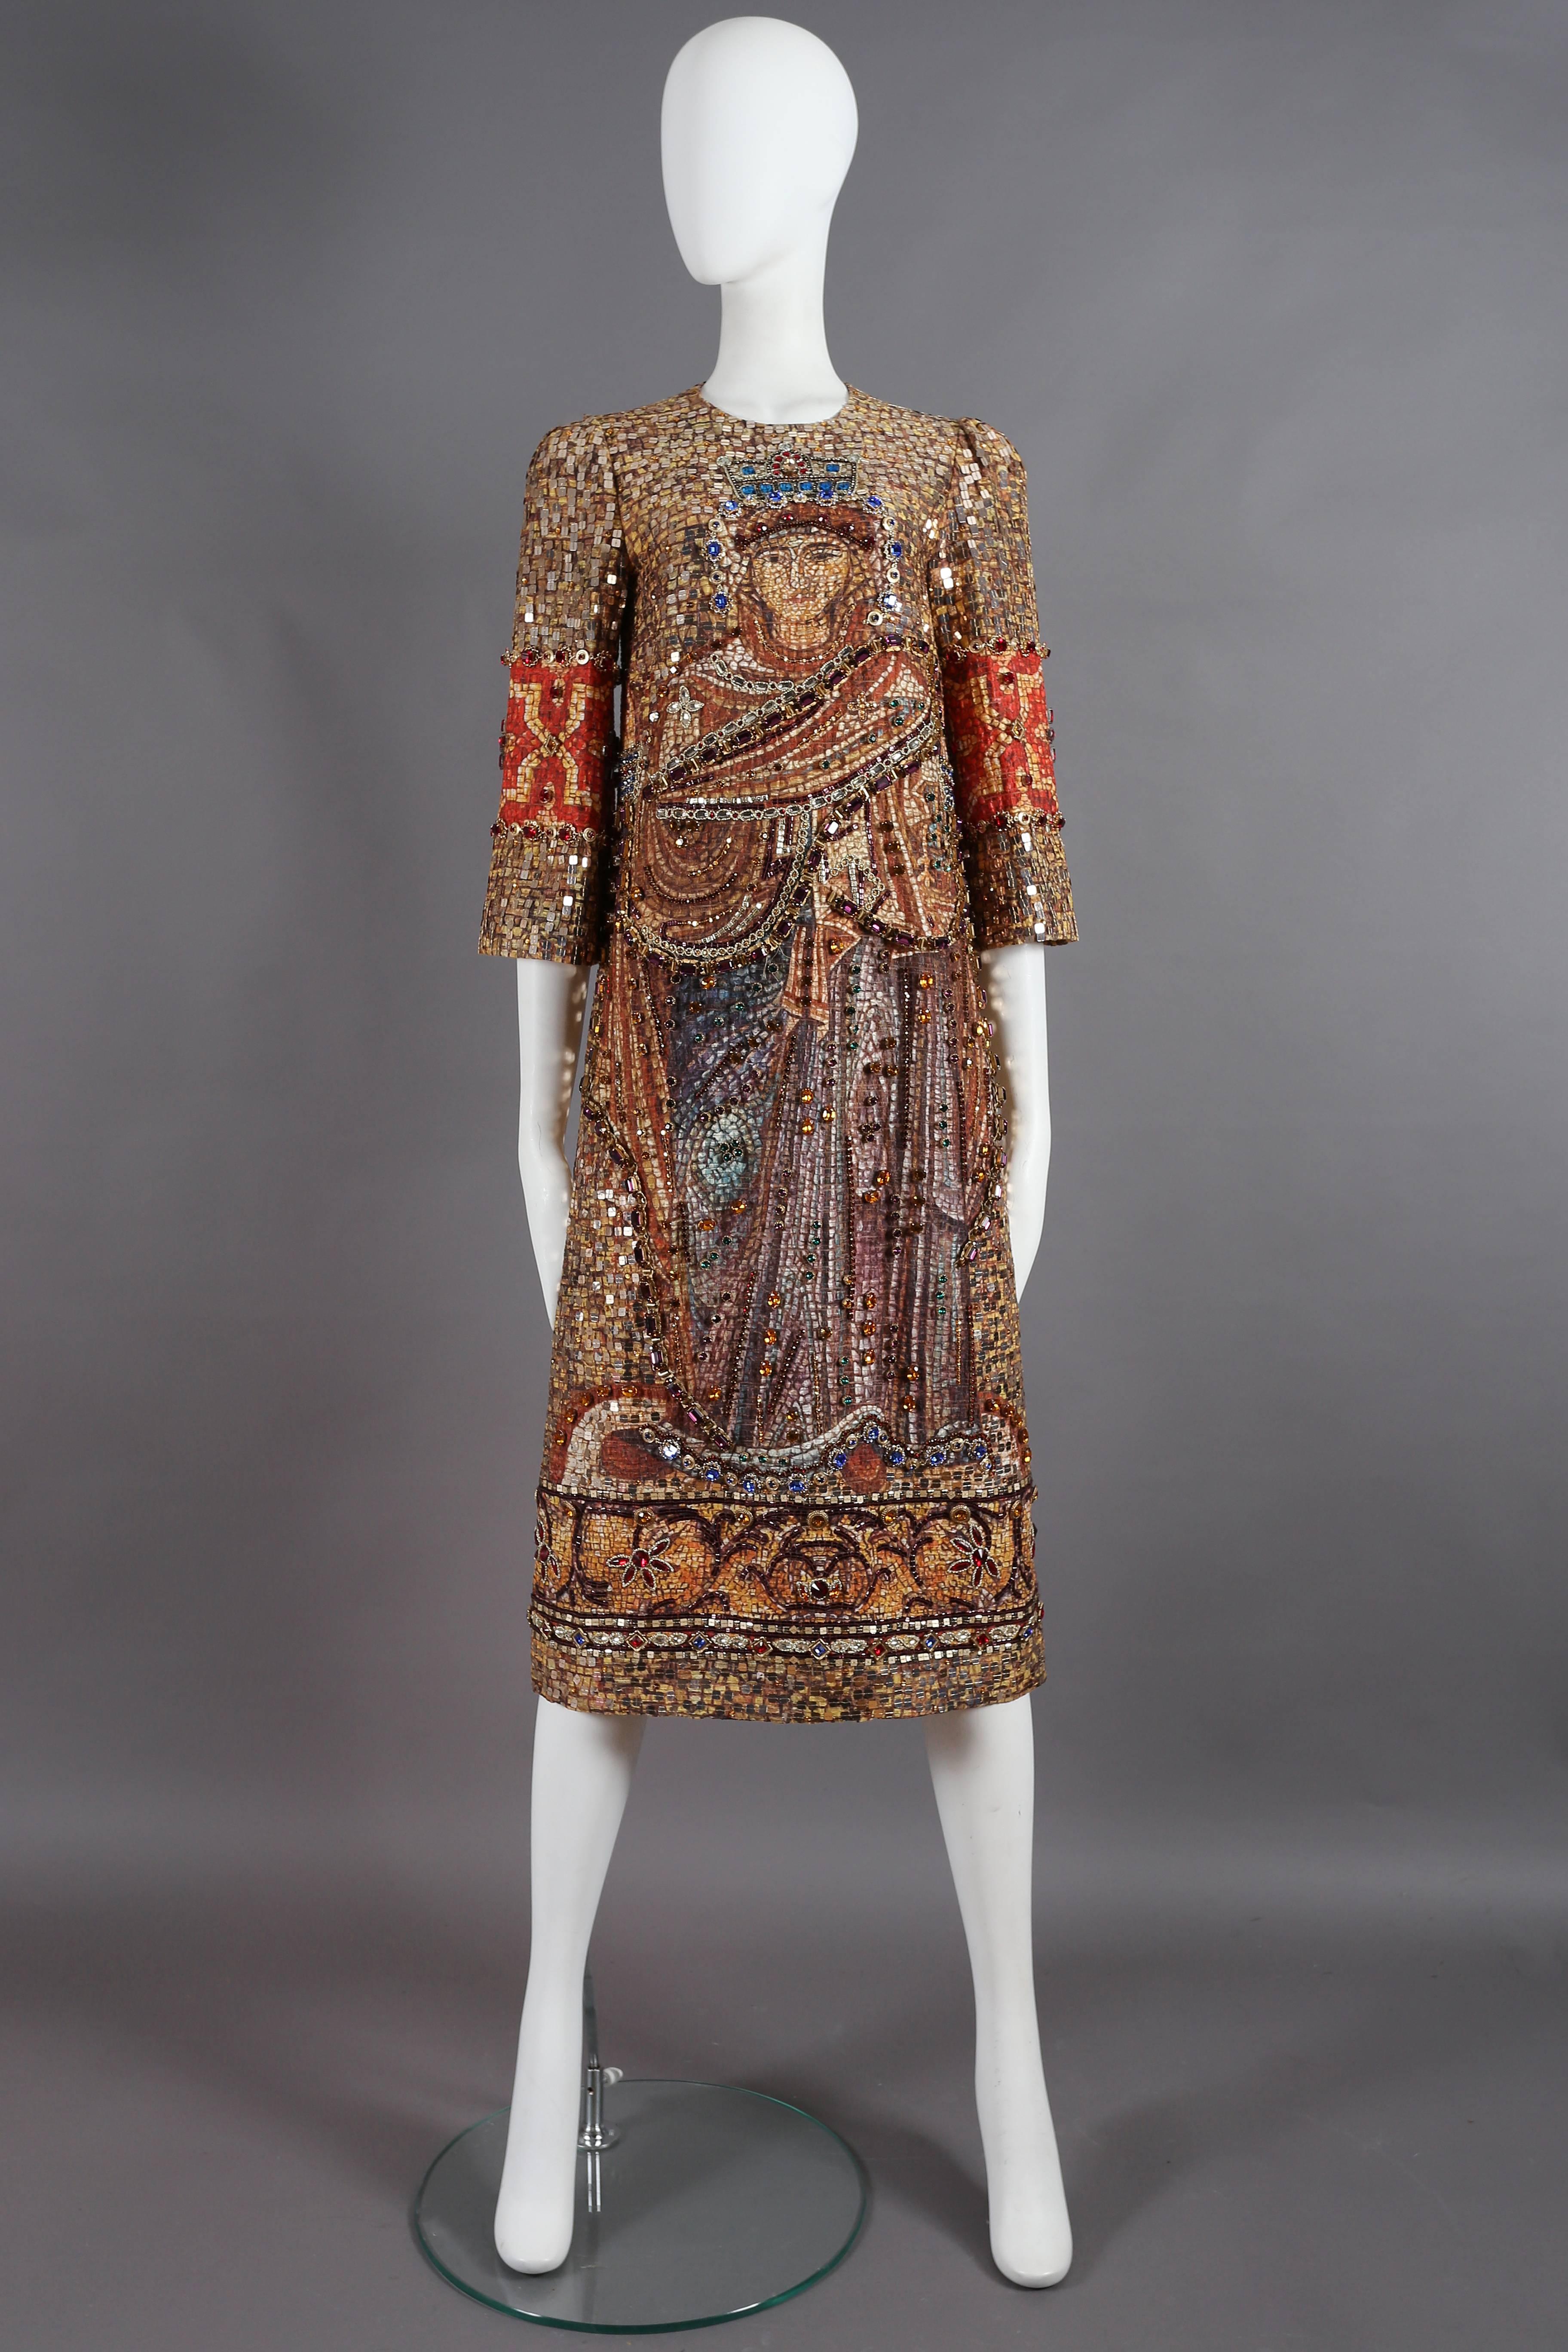 Exquisite and rare Dolce & Gabbana mosaic embellished shift dress, autumn-winter 2013. The silk dress features a Venetian inspired mosaic print throughout and is thoroughly embellished with square gold sequins, rhinestones, and beads. 

